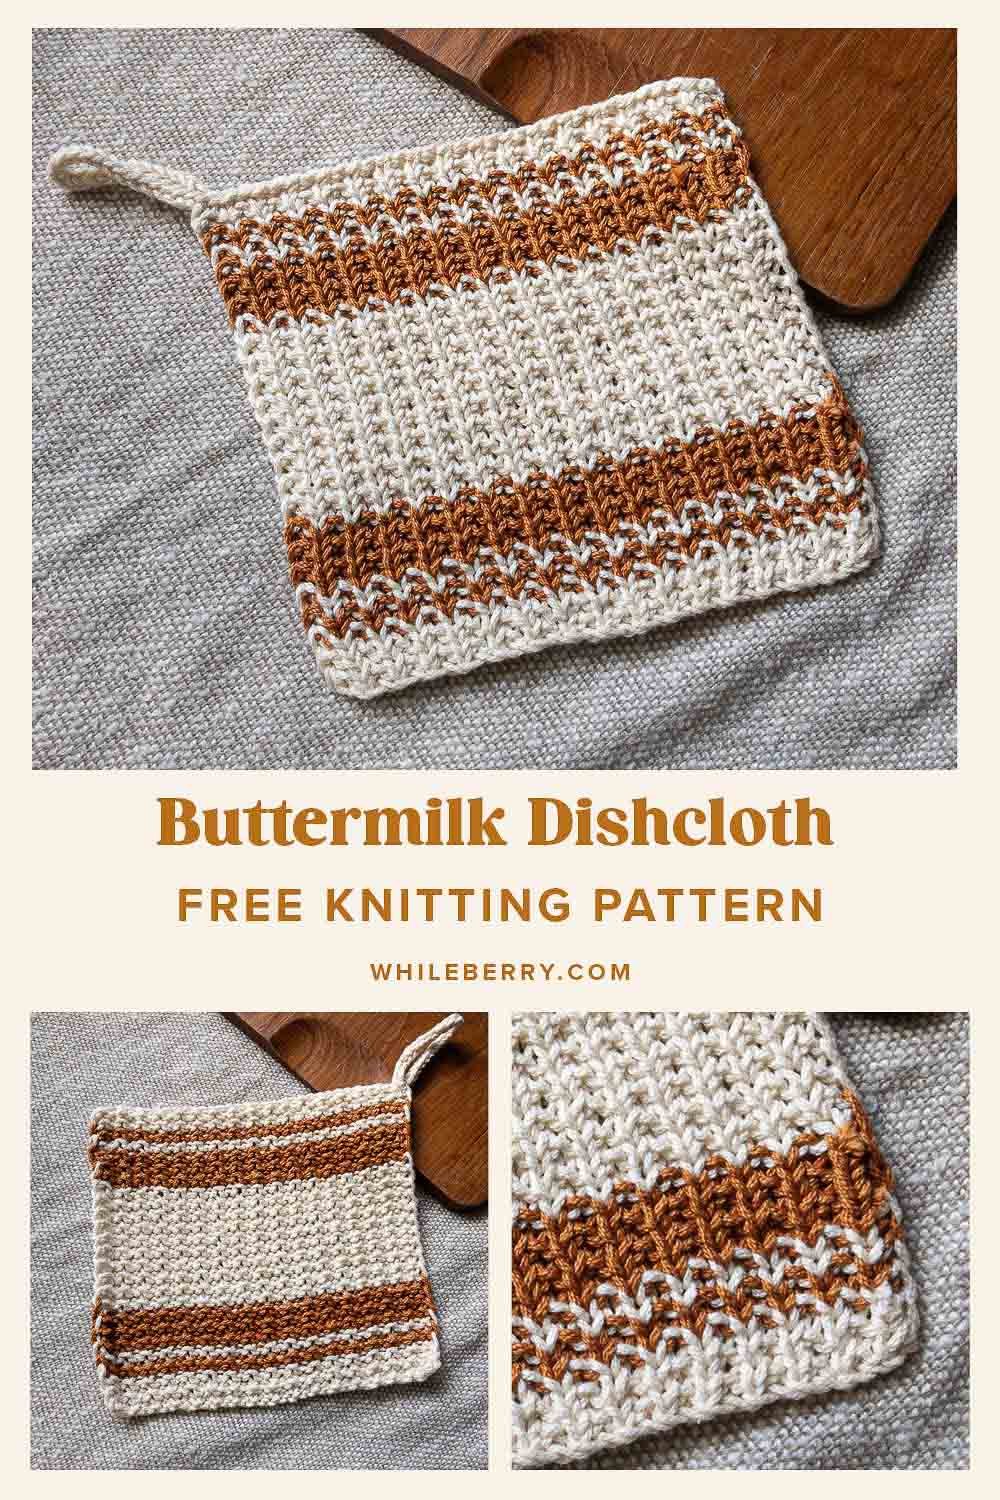 Easy Top Free Knitting Patterns - In the Loop Knitting